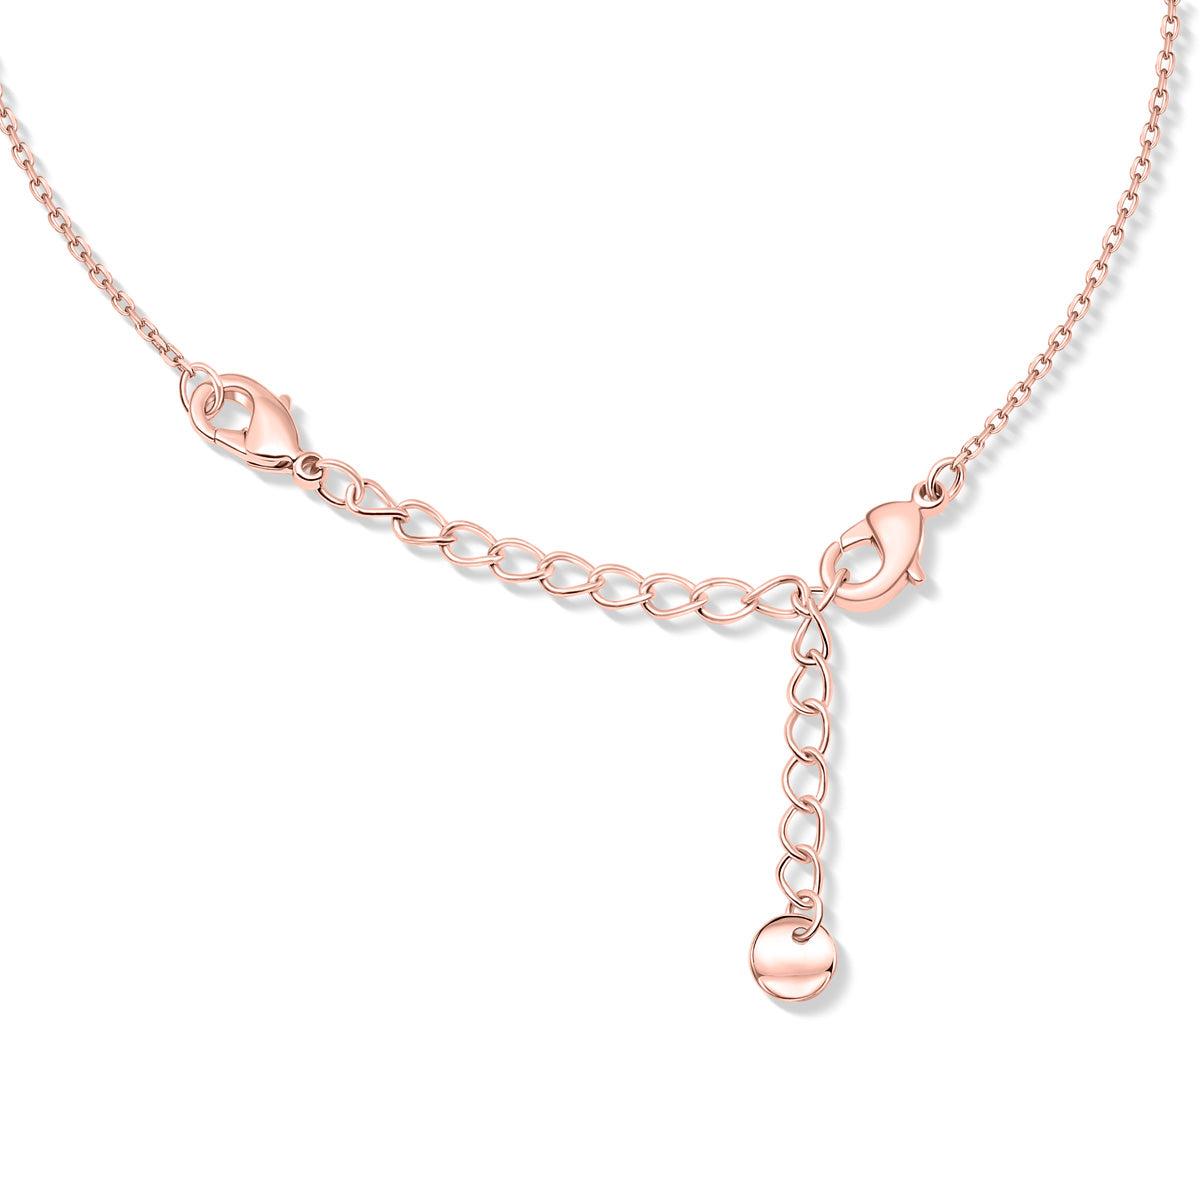 Rose gold necklace extender chain